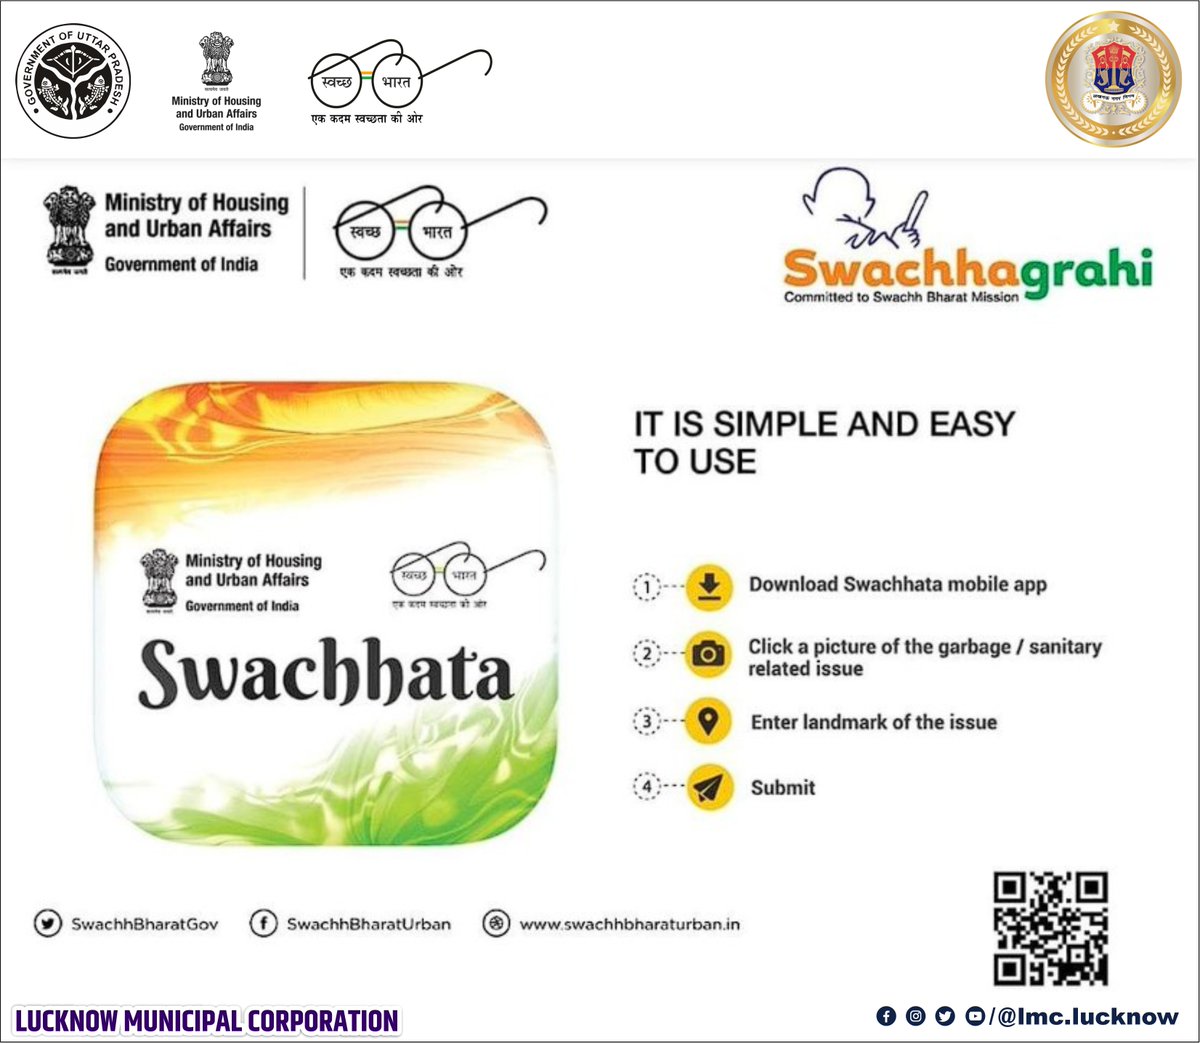 Download The Swachhata App
Right away if you have complaints about cleanliness

#WomenLedSanitation
#IndiaVsGarbage #AmritMahotsav.
#SwachhSurvekshan2023 #wastesegregation #SwachhSurvekshan

@aksharmaBharat @SwachhBharatGov @MoHUA_India @ChiefSecyUP @HardeepSPuri @mp_kaushal…